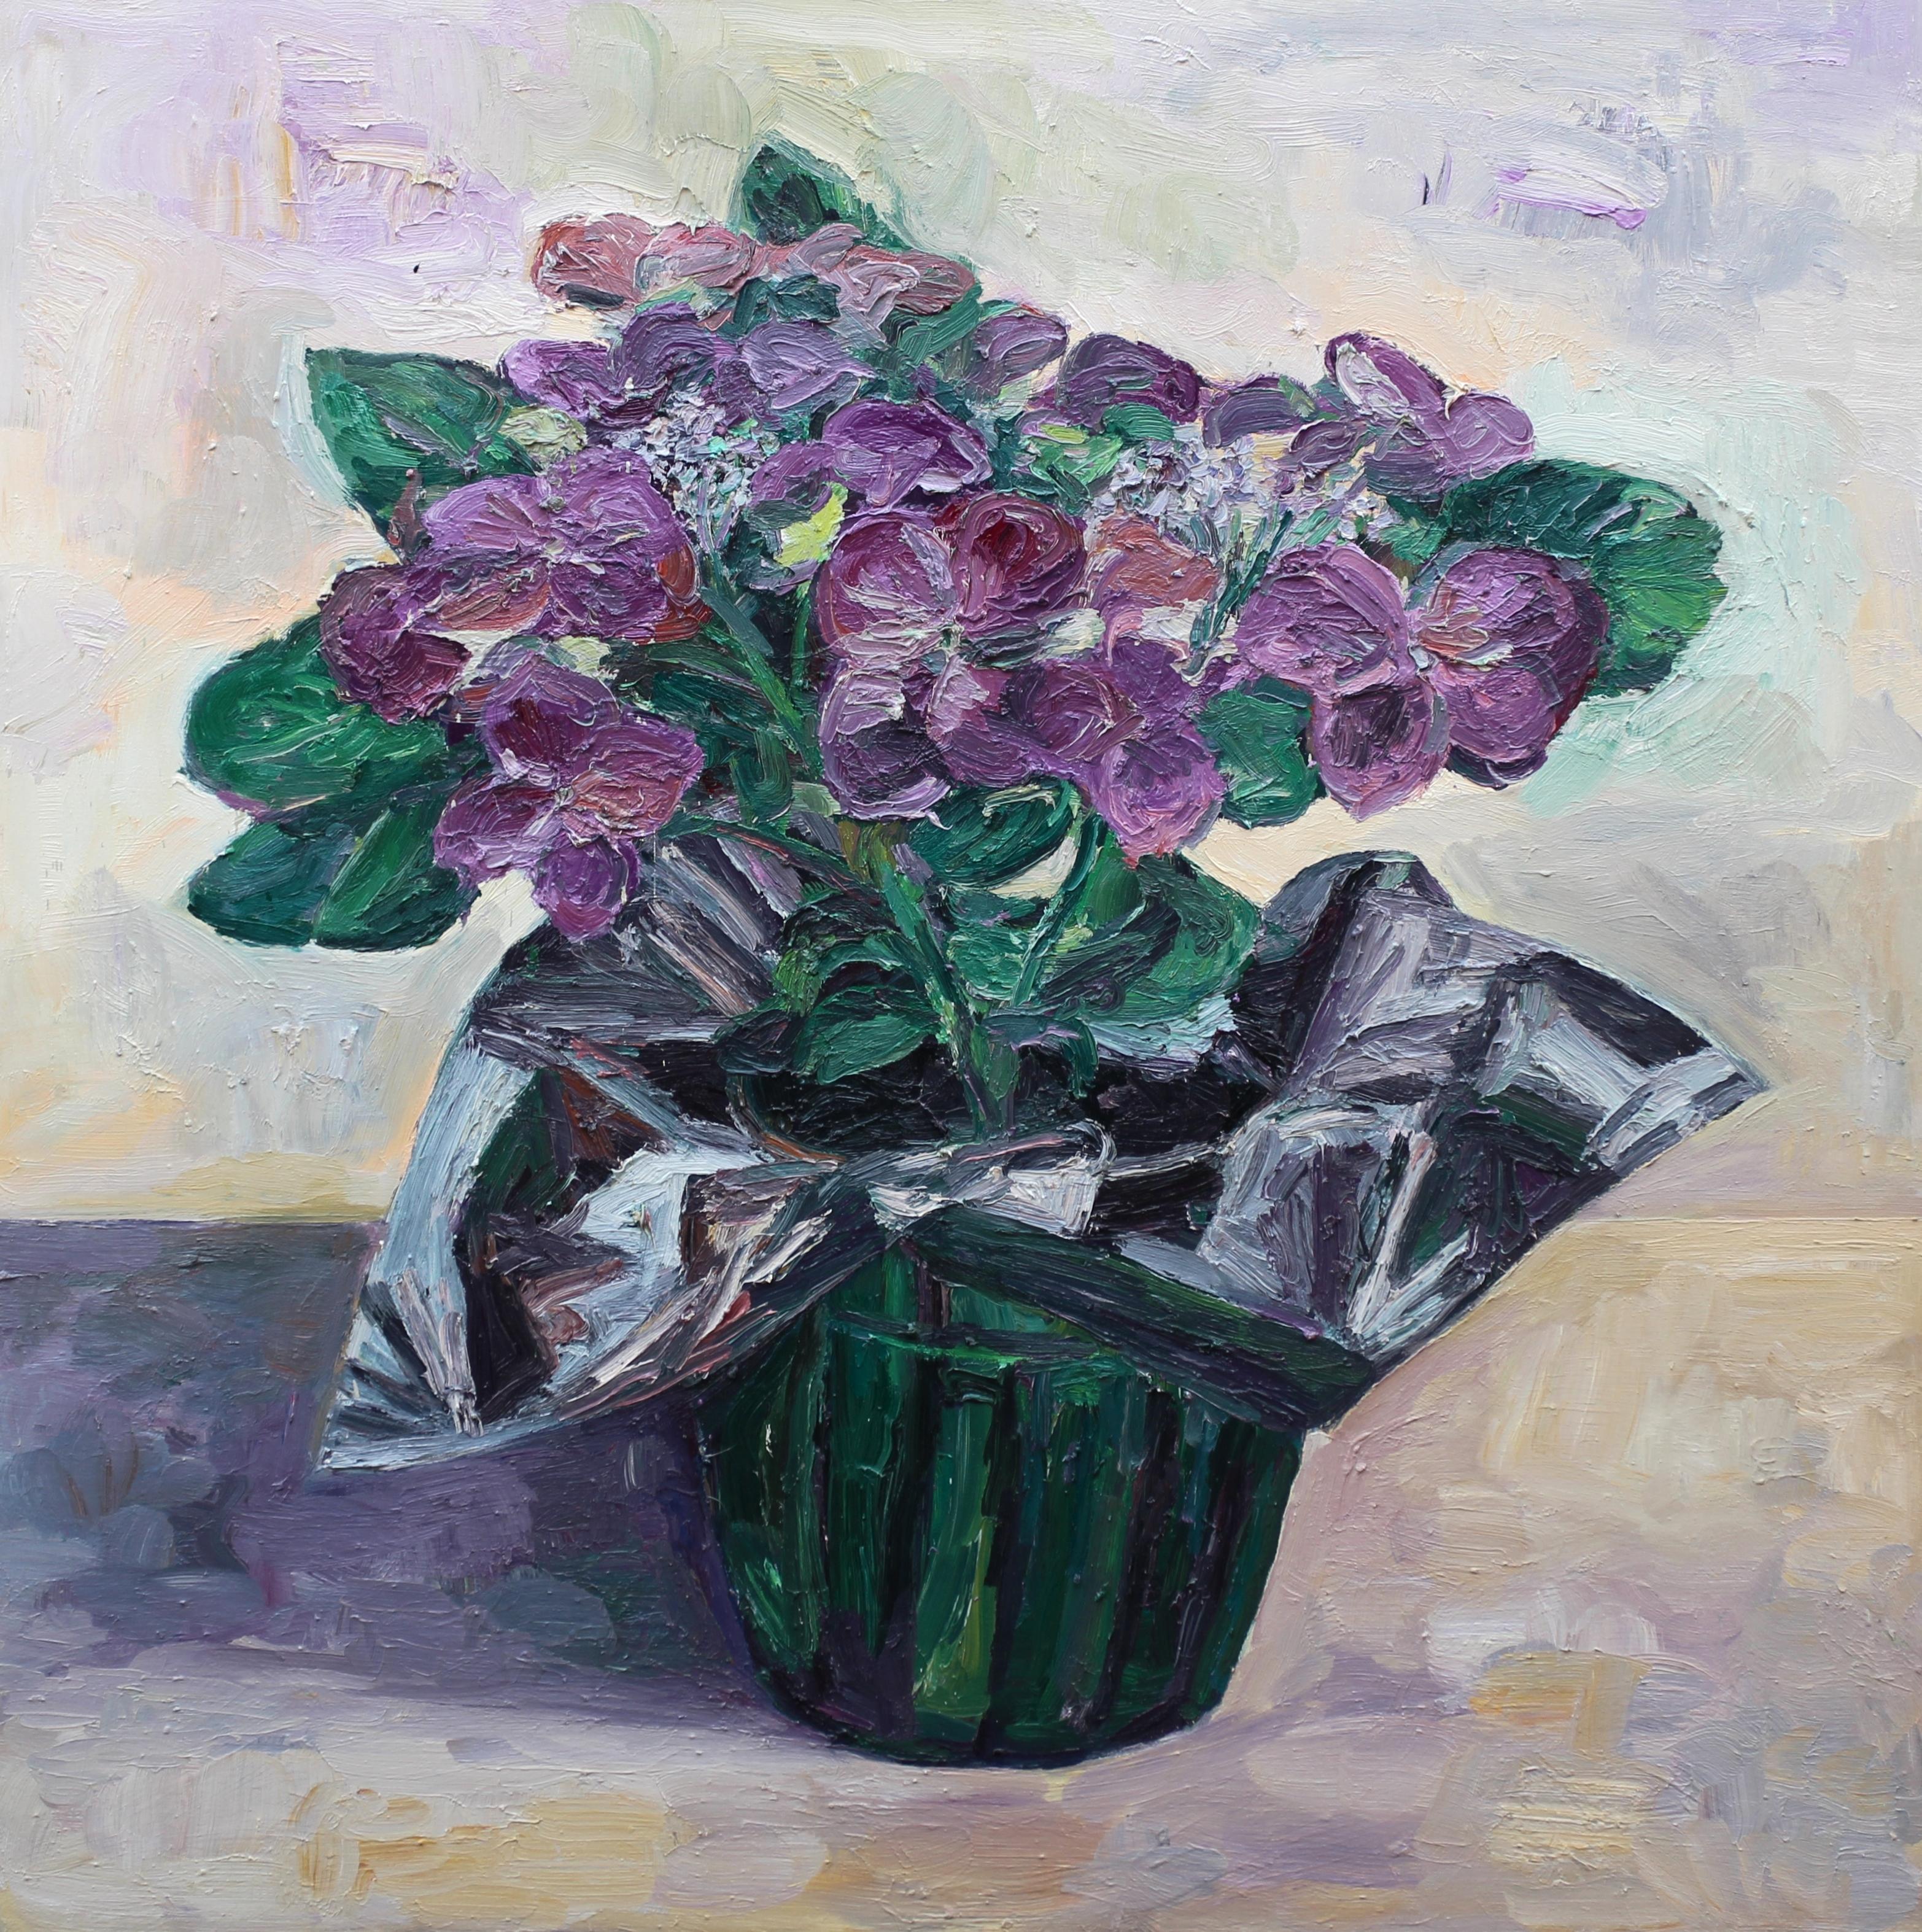 I did a series of paintings based on this Hydrangea plant I bought at the local supermarket. This one was the largest one I did. It is full of bold thick brushstrokes. :: Painting :: Impressionist :: This piece comes with an official certificate of